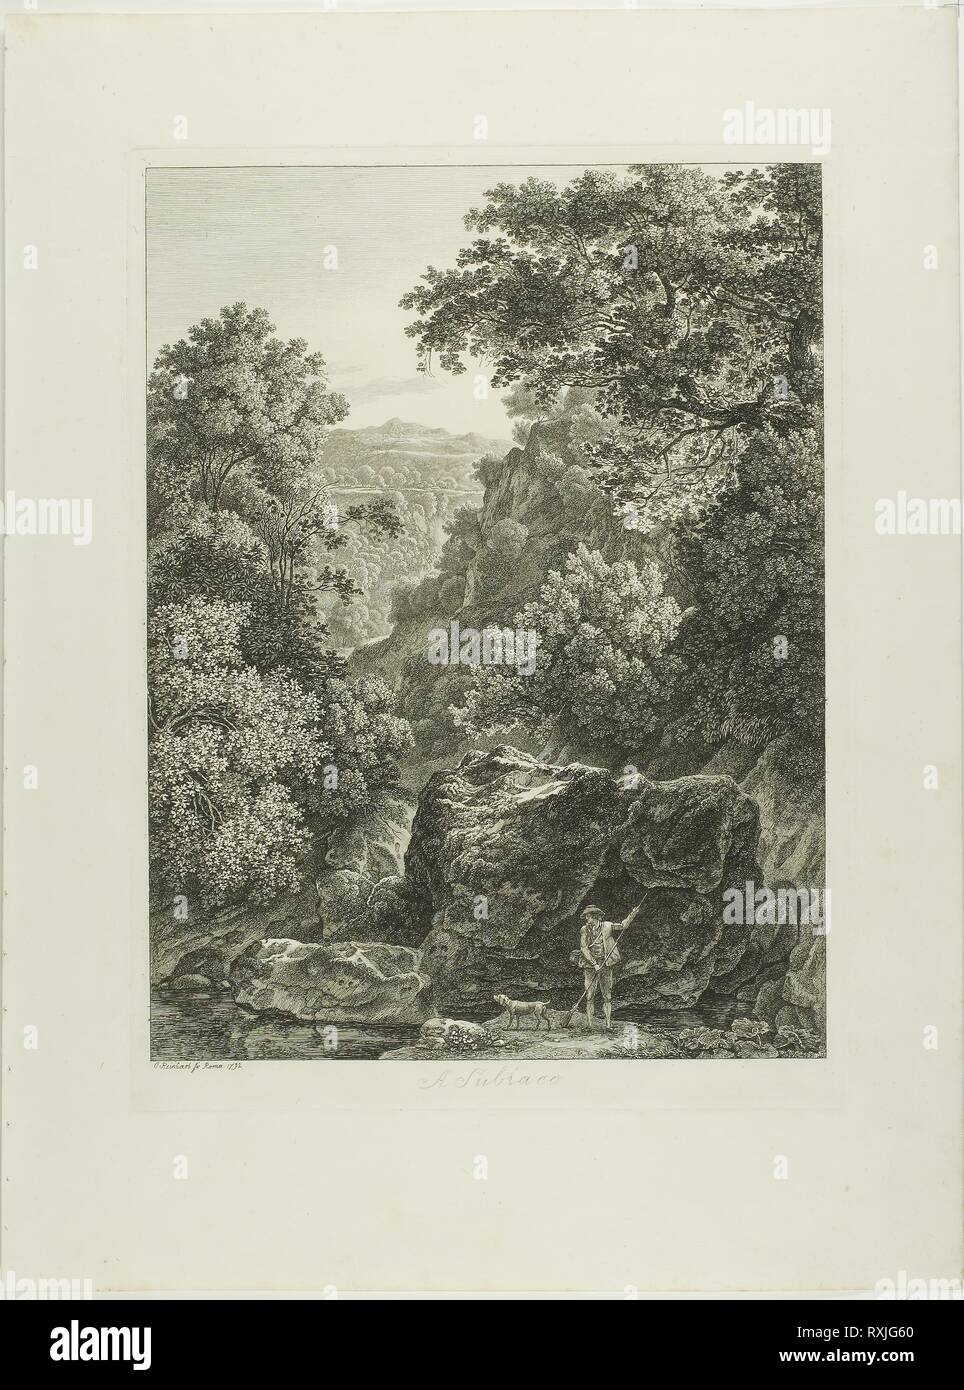 A Subiaco, from Malerisch Radierte Prospekte aus Italien. Johann Christian Reinhart; German, 1761-1847. Date: 1792. Dimensions: 350 × 265 mm (image); 378 × 281 mm (plate); 500 × 375 mm (sheet). Etching on ivory laid paper. Origin: Germany. Museum: The Chicago Art Institute. Stock Photo